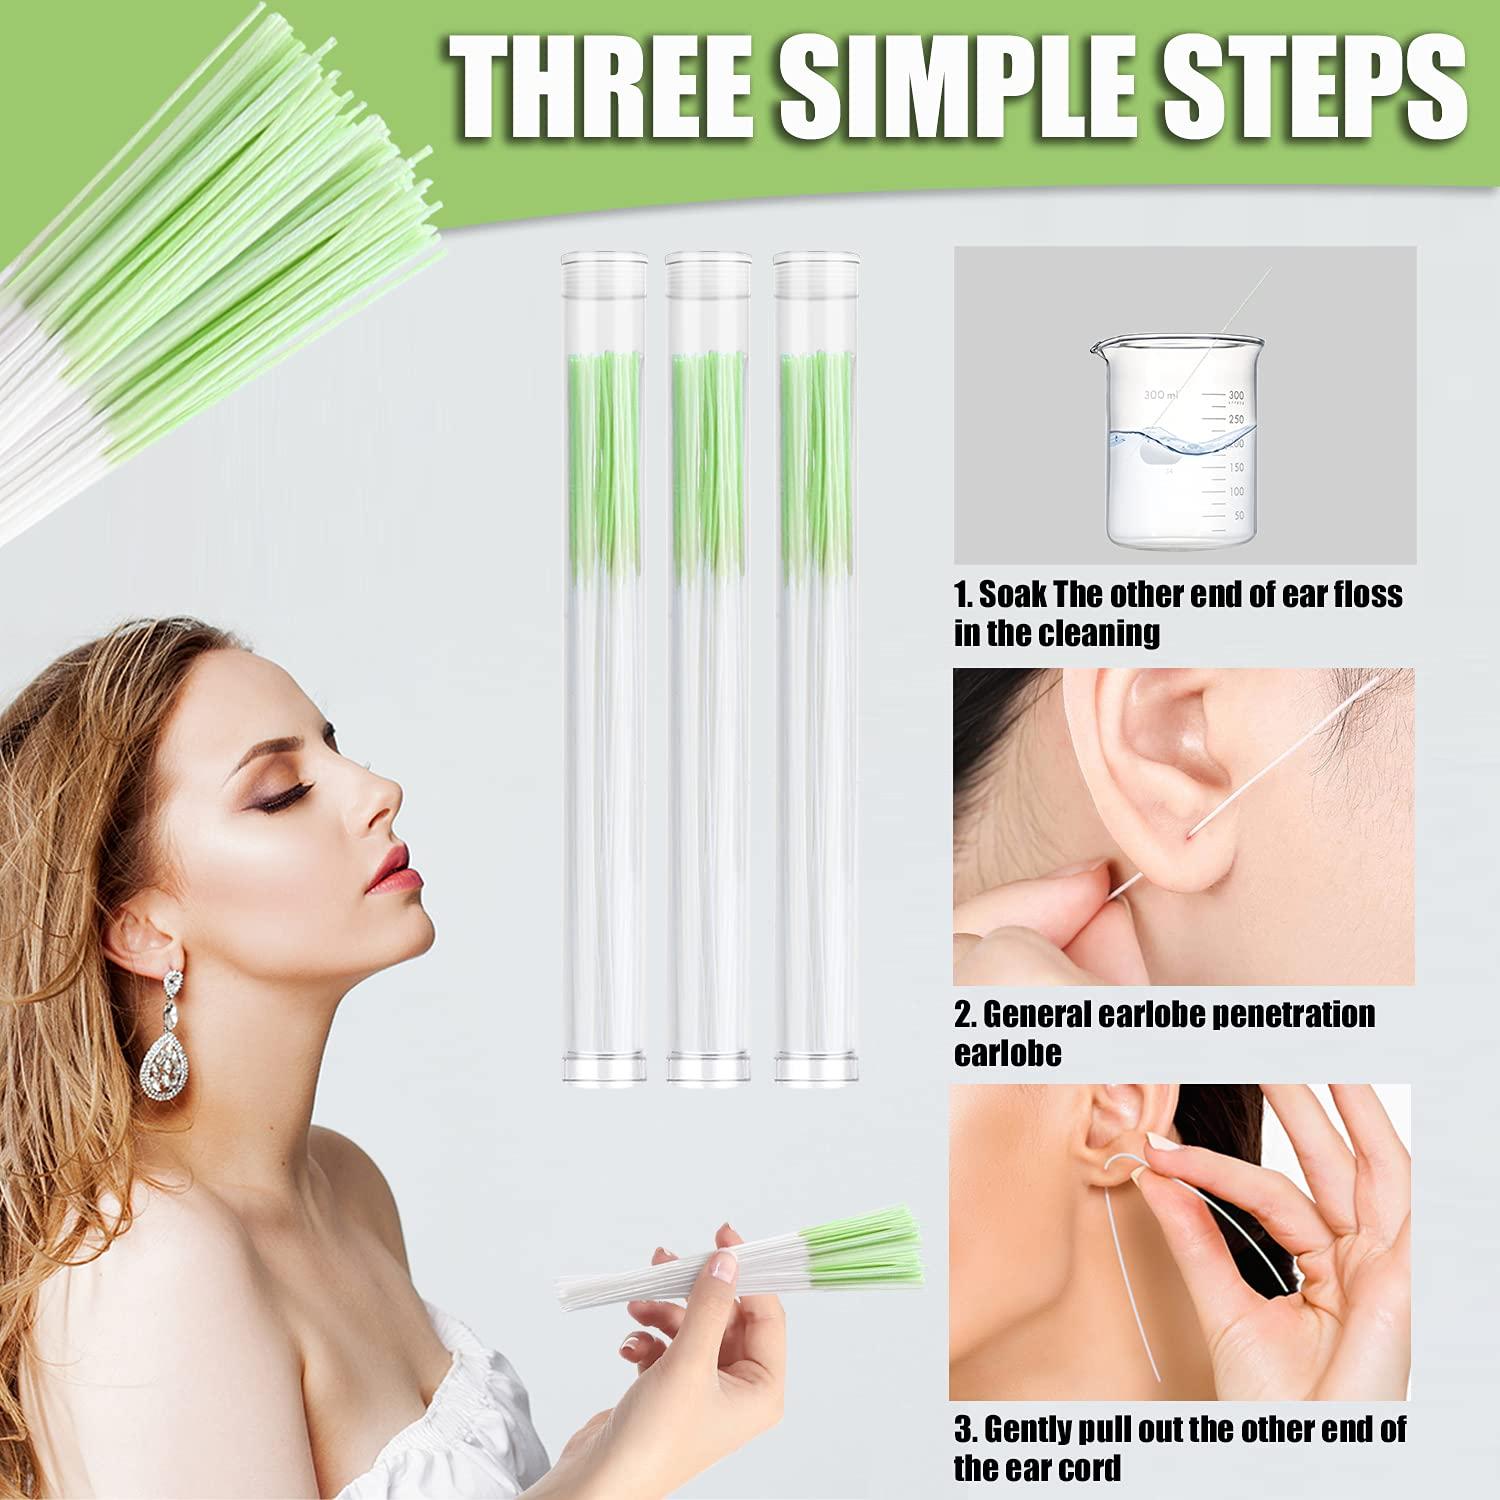 Bedrift Dekan Sult 300PCS Disposable Ear Floss for Ear Hole Piercing Aftercare, Flexible  Earrings Hole Cleaner, Piercied Ears Cleaning Line, Gentle Ear Flossing  with Rose Fragrance, Odor Removal